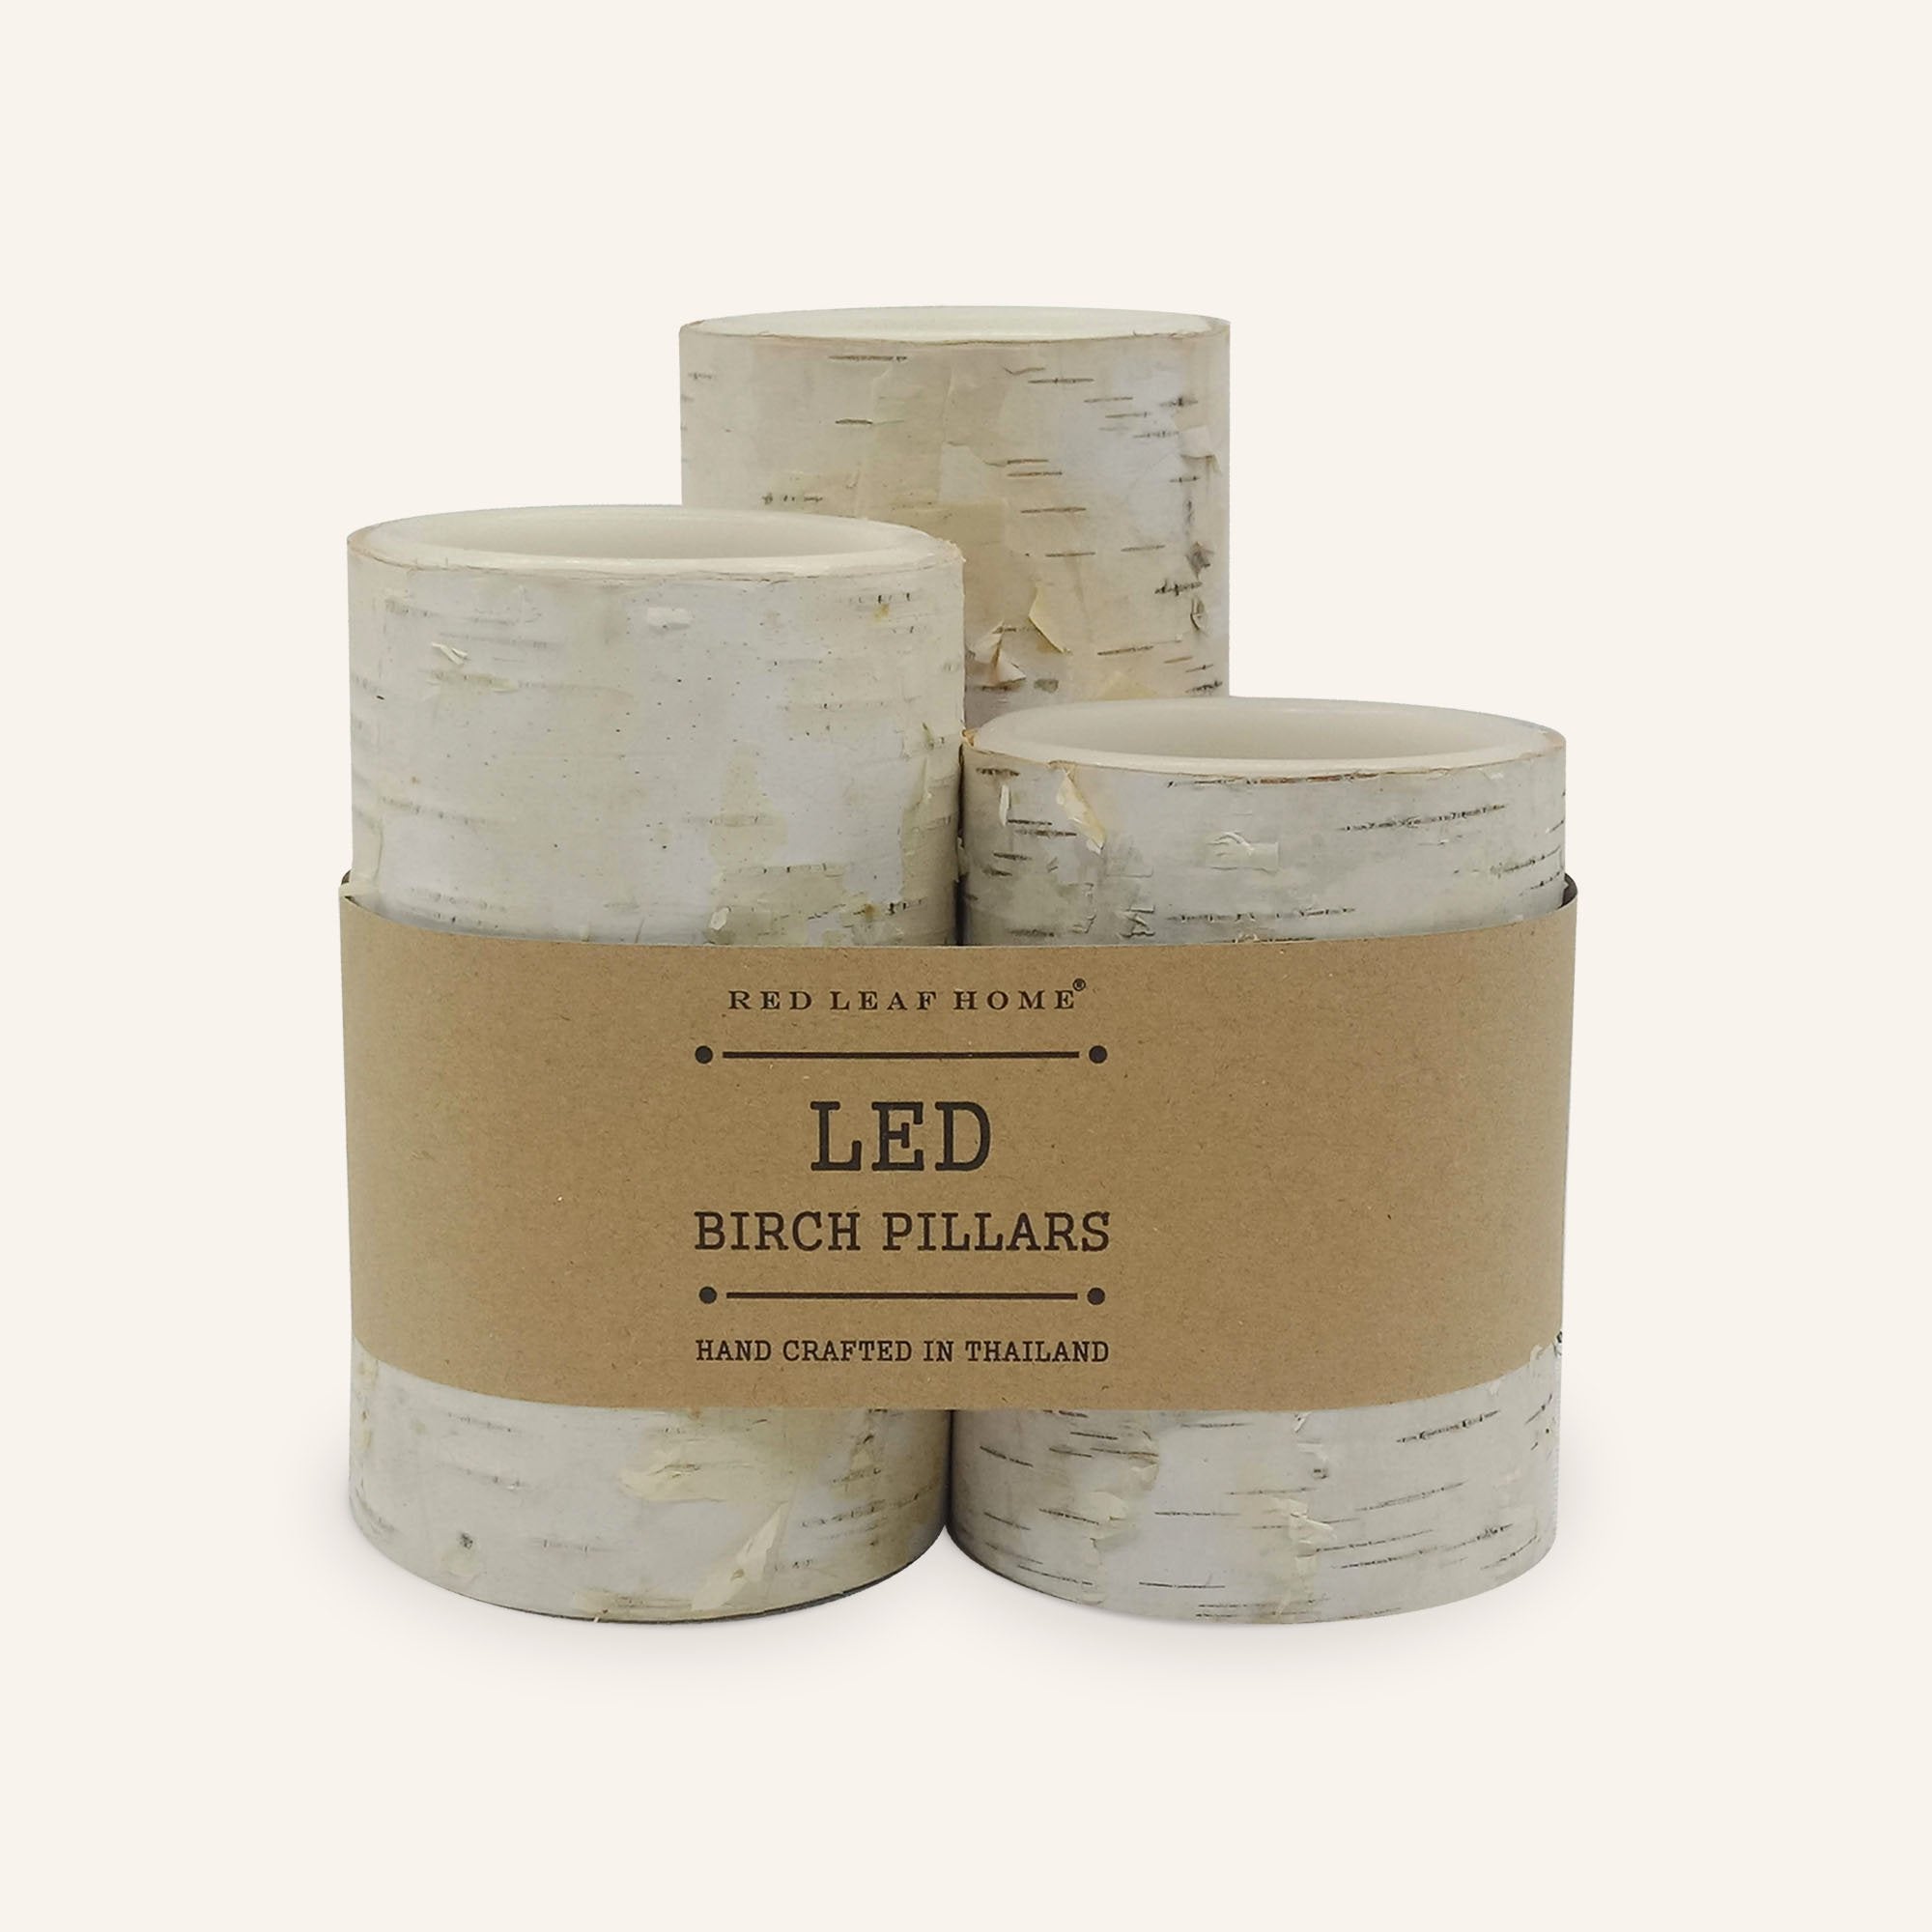 Three birch-bark LED candles wrapped in a brown paper label that reads, "Red Leaf Home. LED Birch Pillars. Hand crafted in Thailand."